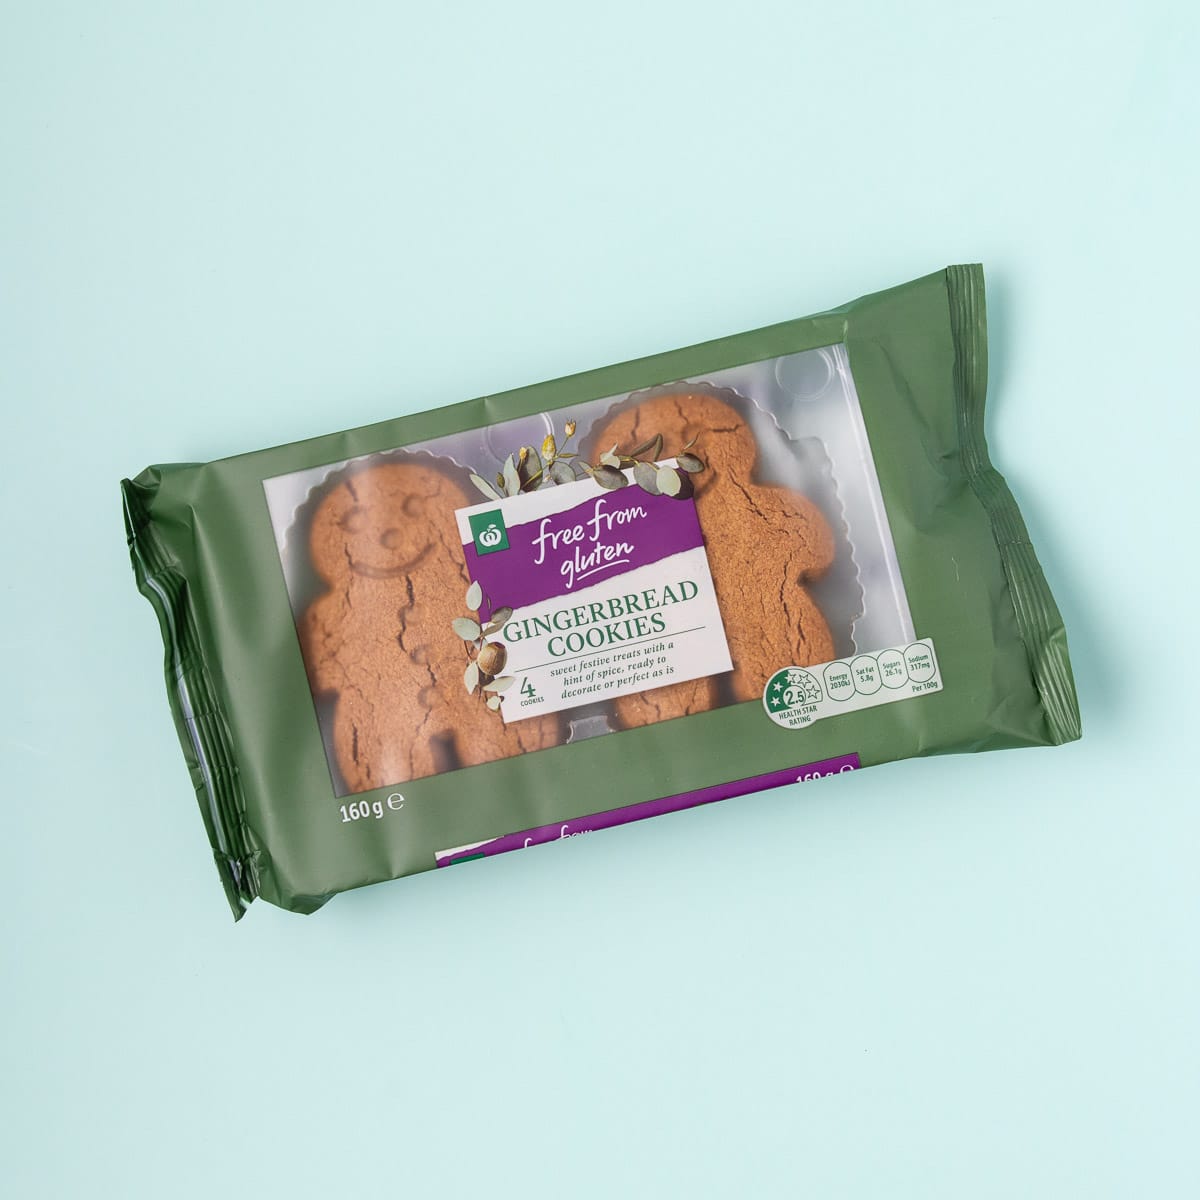 A packet of Free From Gluten gingerbread cookies on a mint green background.